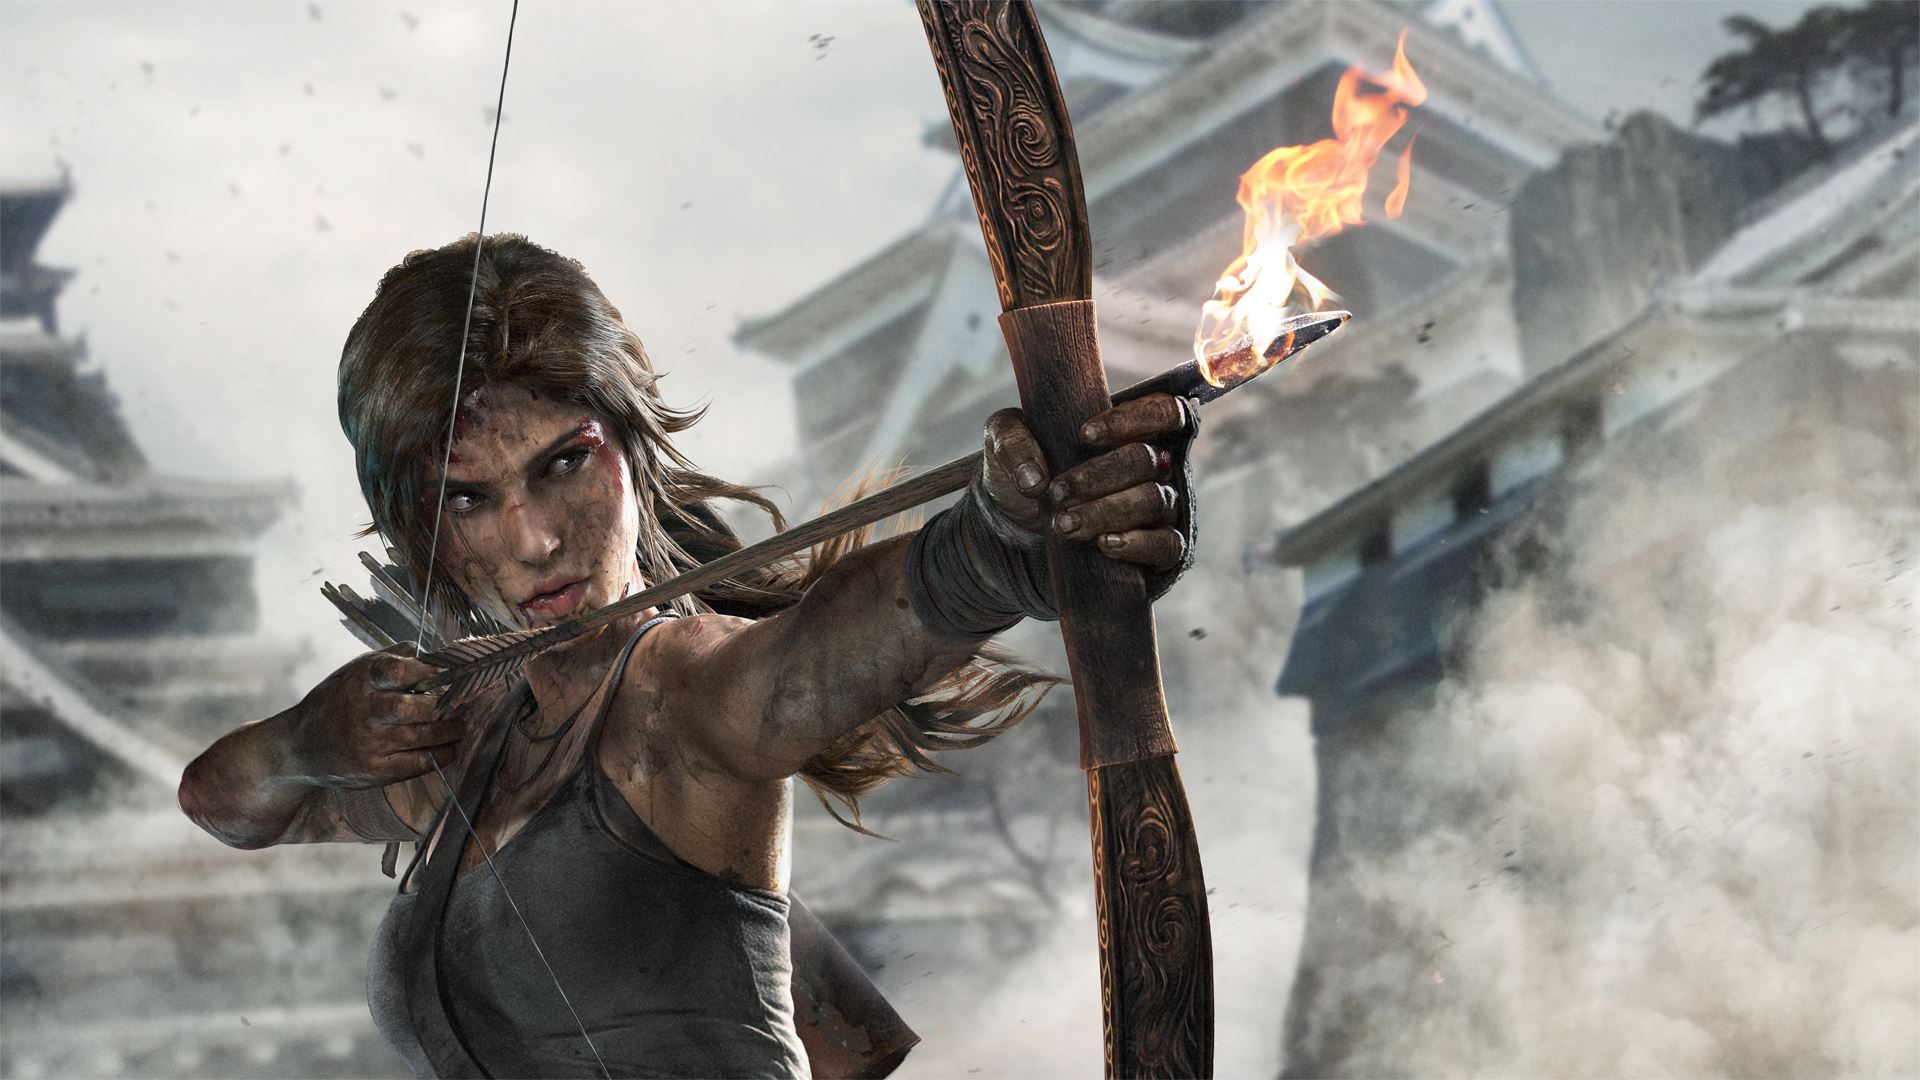 General 1920x1080 Tomb Raider video games women bow Arrow (TV series) arrows fire Lara Croft (Tomb Raider) Tomb Raider (2013) Crystal Dynamics bow and arrow brunette PC gaming video game characters aiming wounds blood dirty